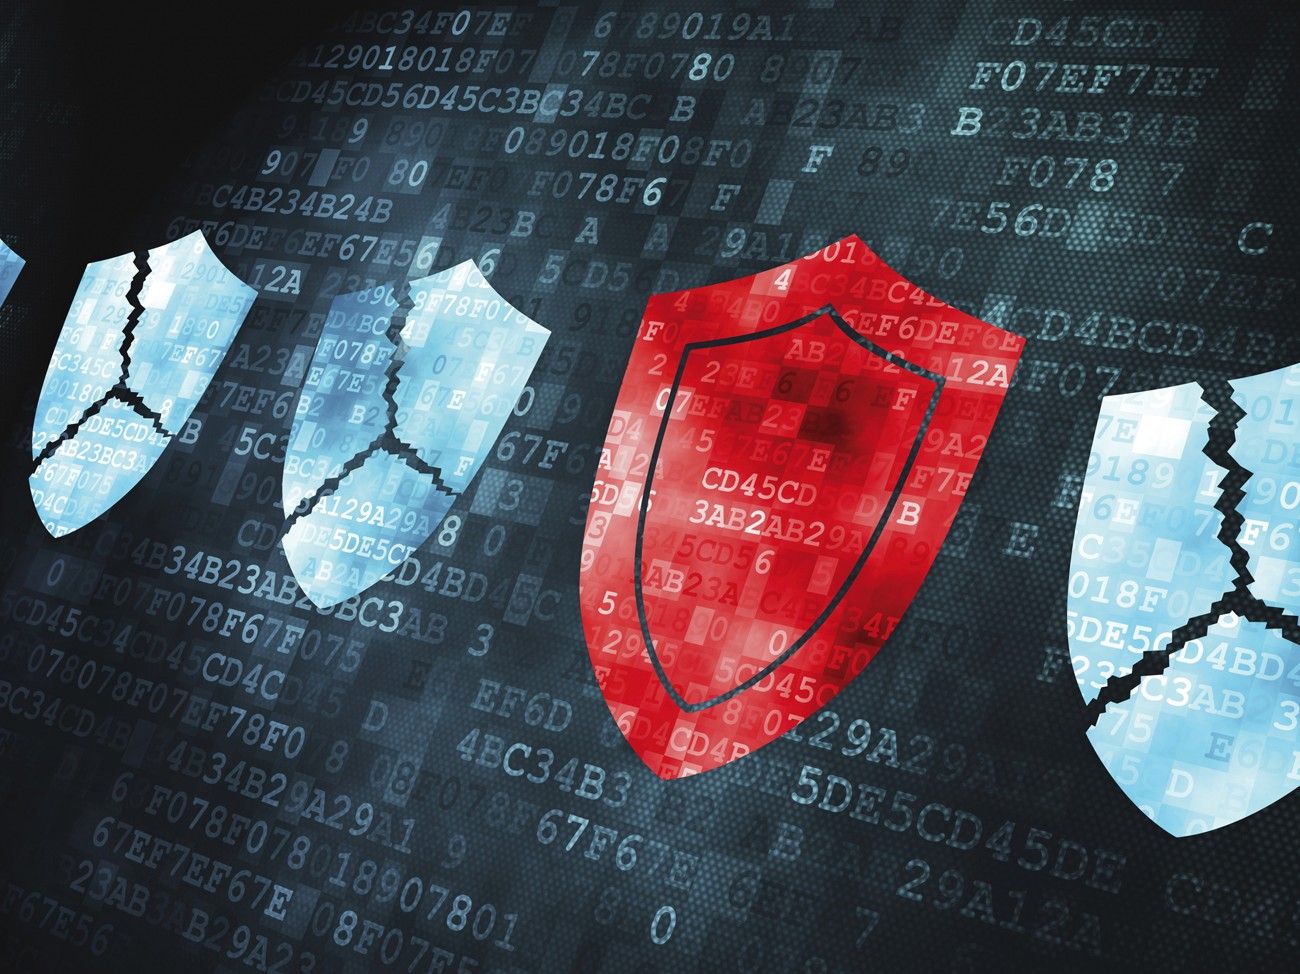 CFOs must play a crucial role in the fight against cyberattacks